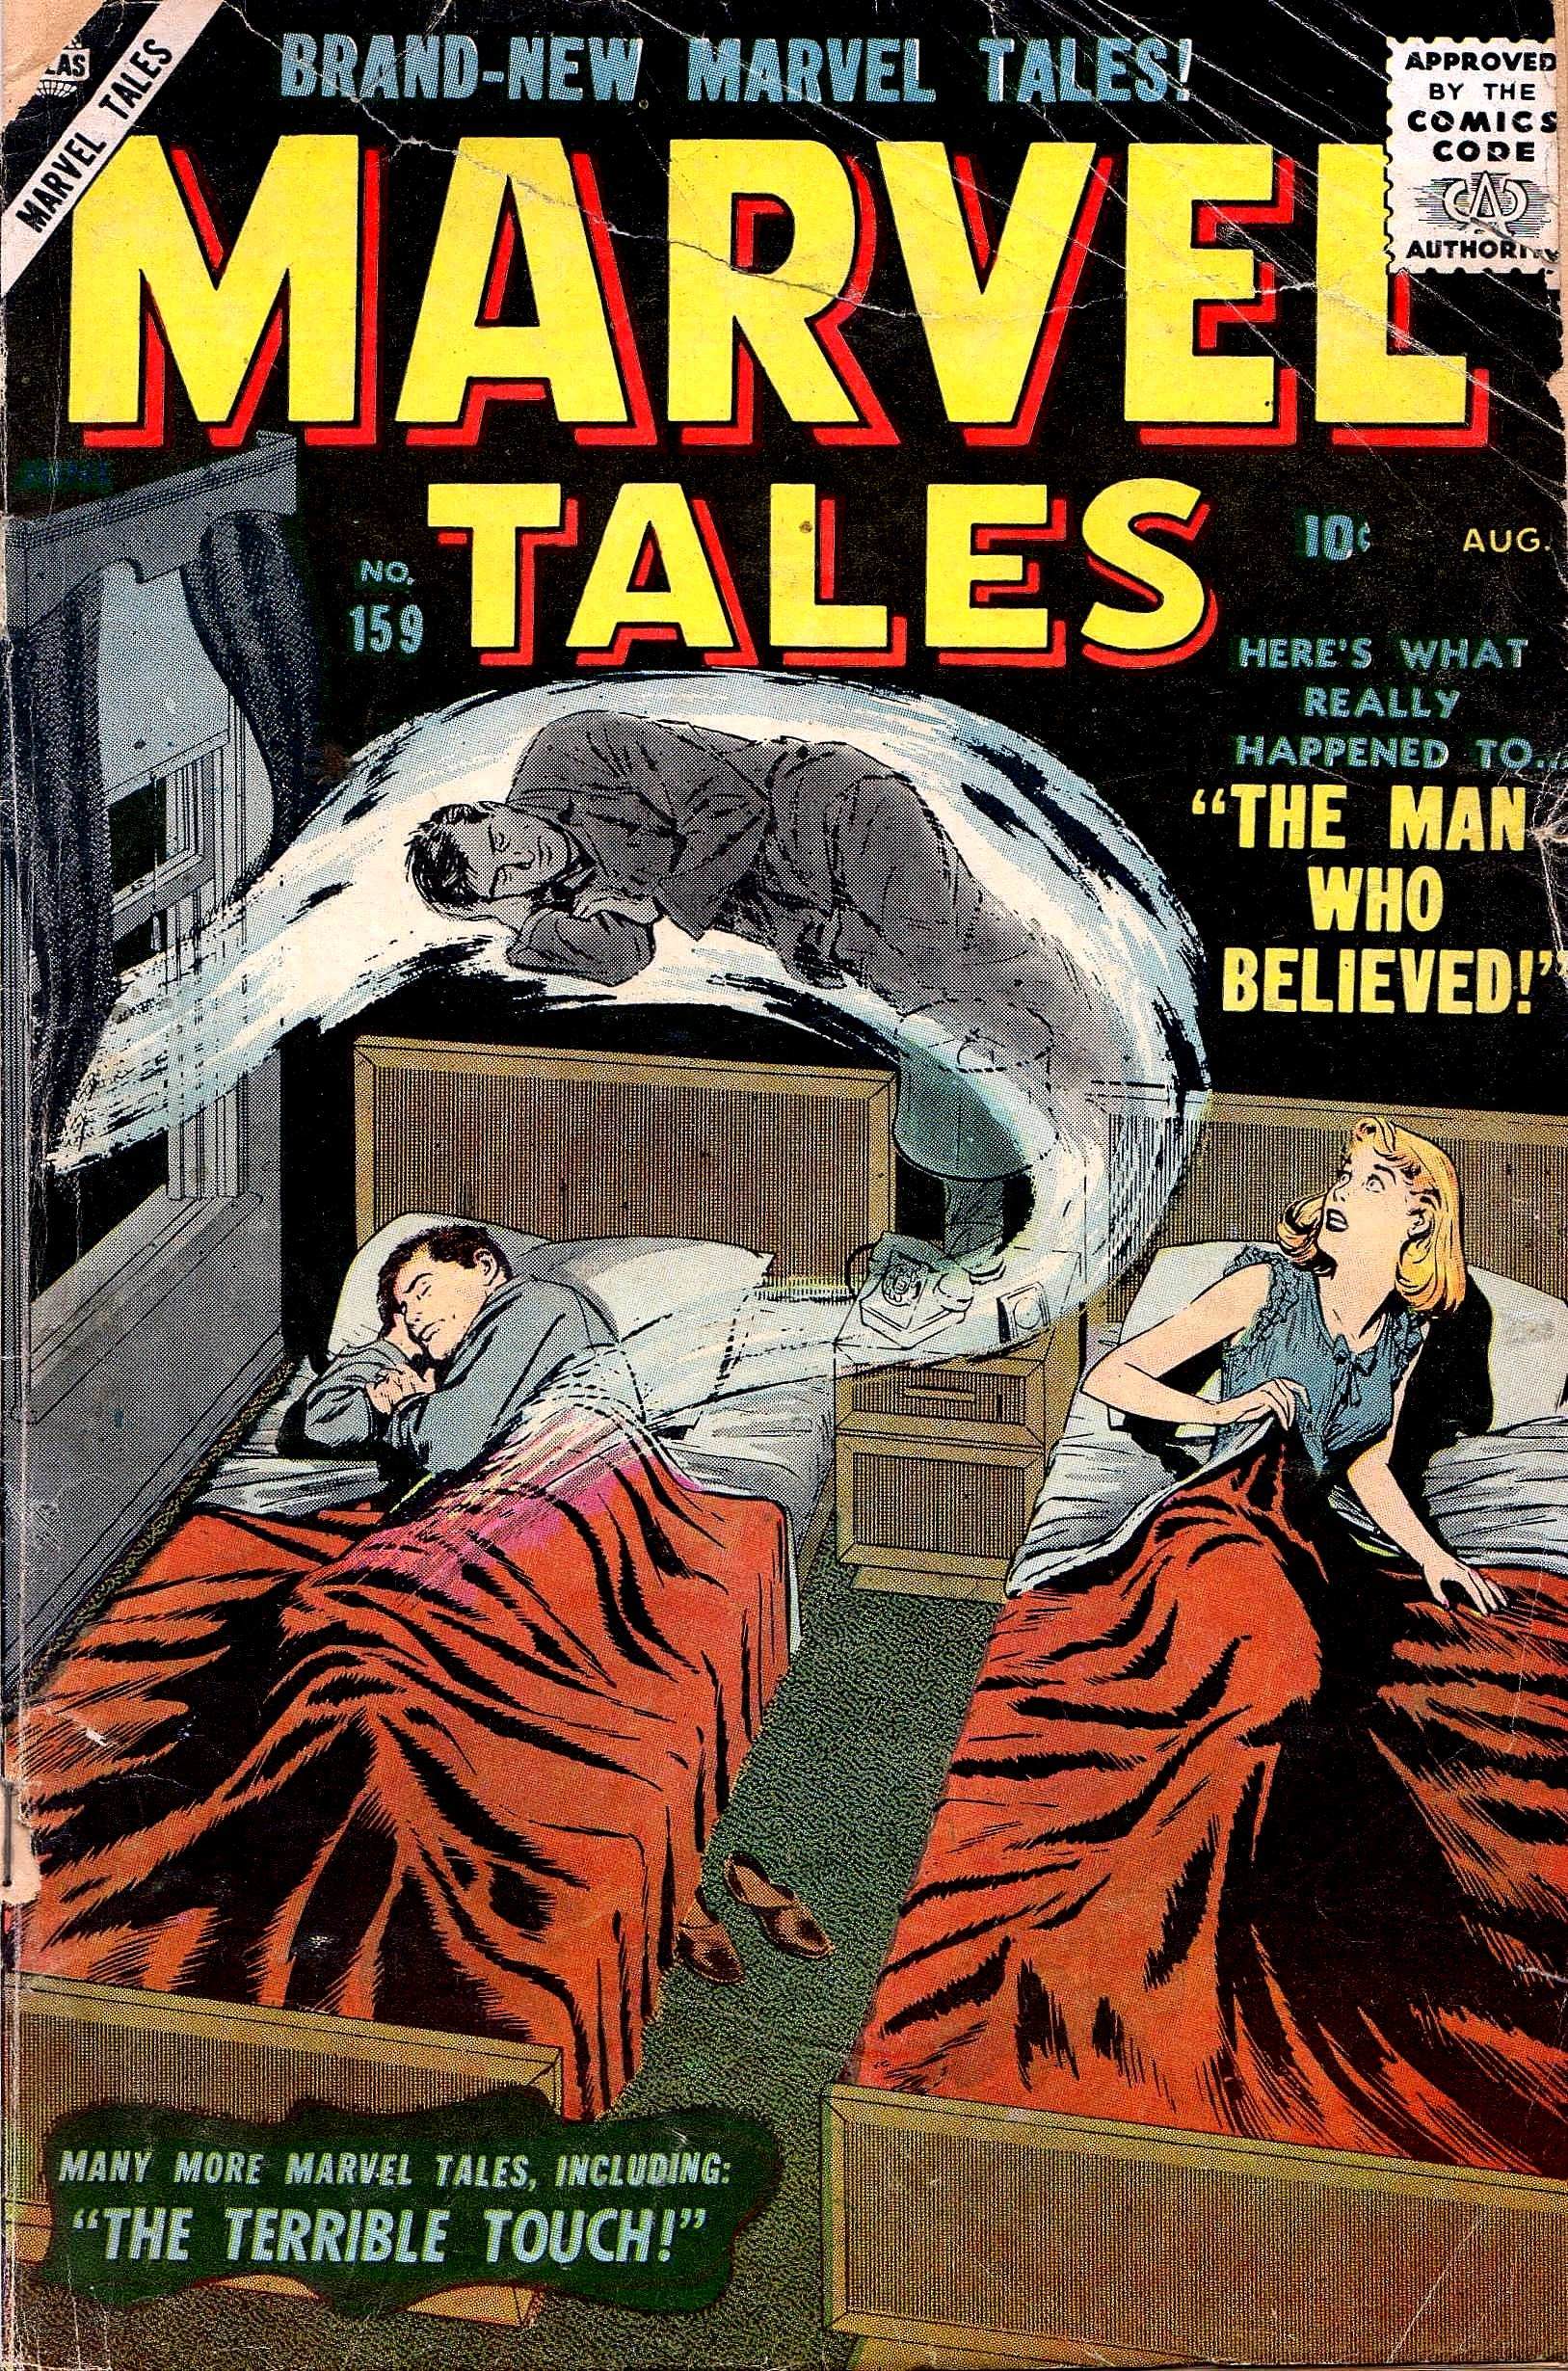 Marvel Tales (1949) 159 Page 0